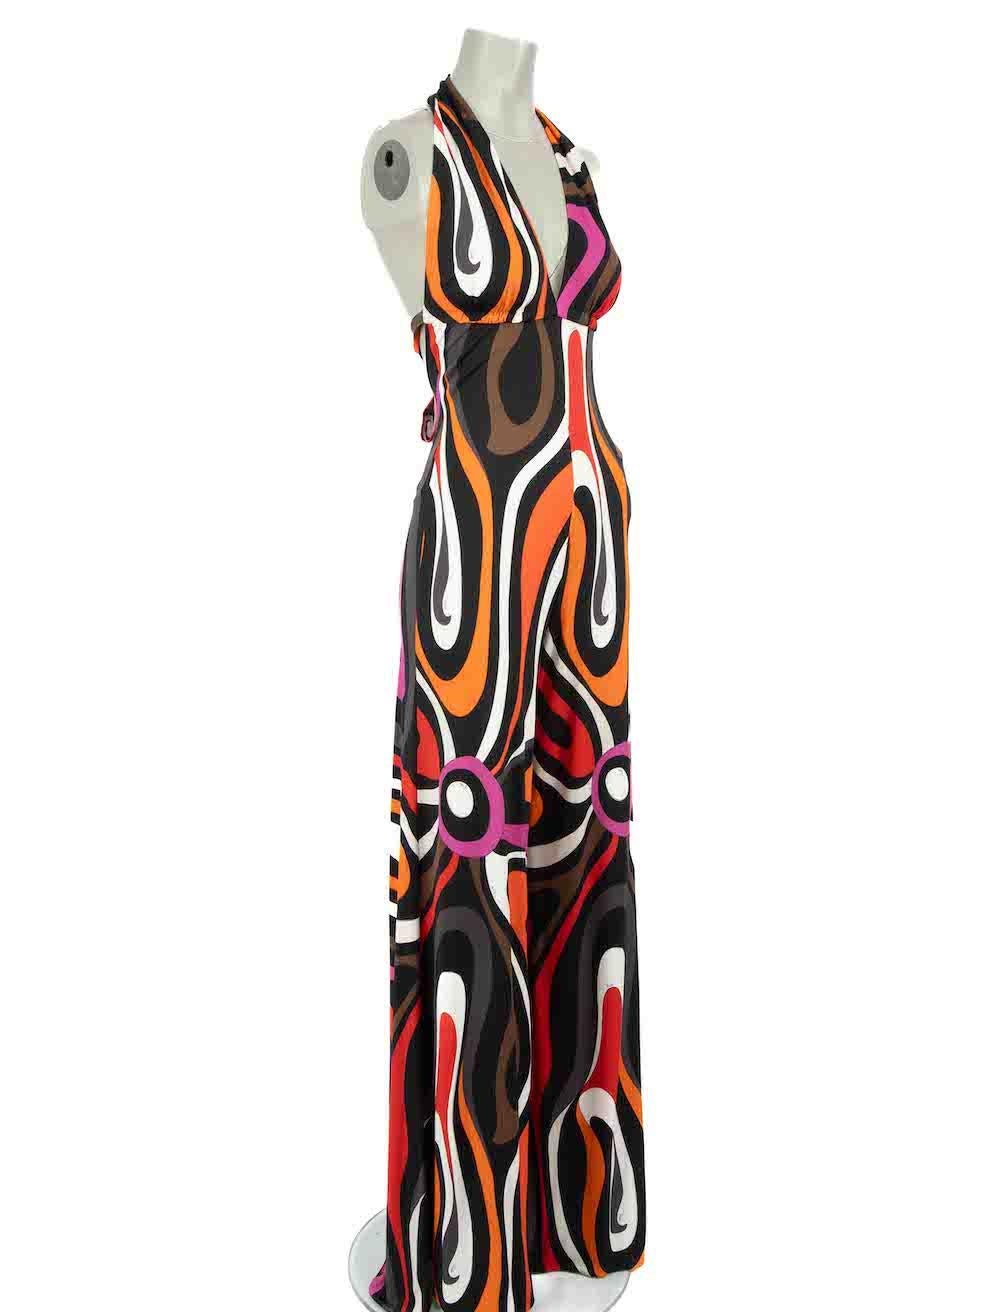 CONDITION is Never worn, with tags. No visible wear to jumpsuit is evident on this new Emilio Pucci designer resale item, however there is a discoloured mark at the neckline due to poor storage.
 
Details
Multicolour
Silk
Jumpsuit
Abstract